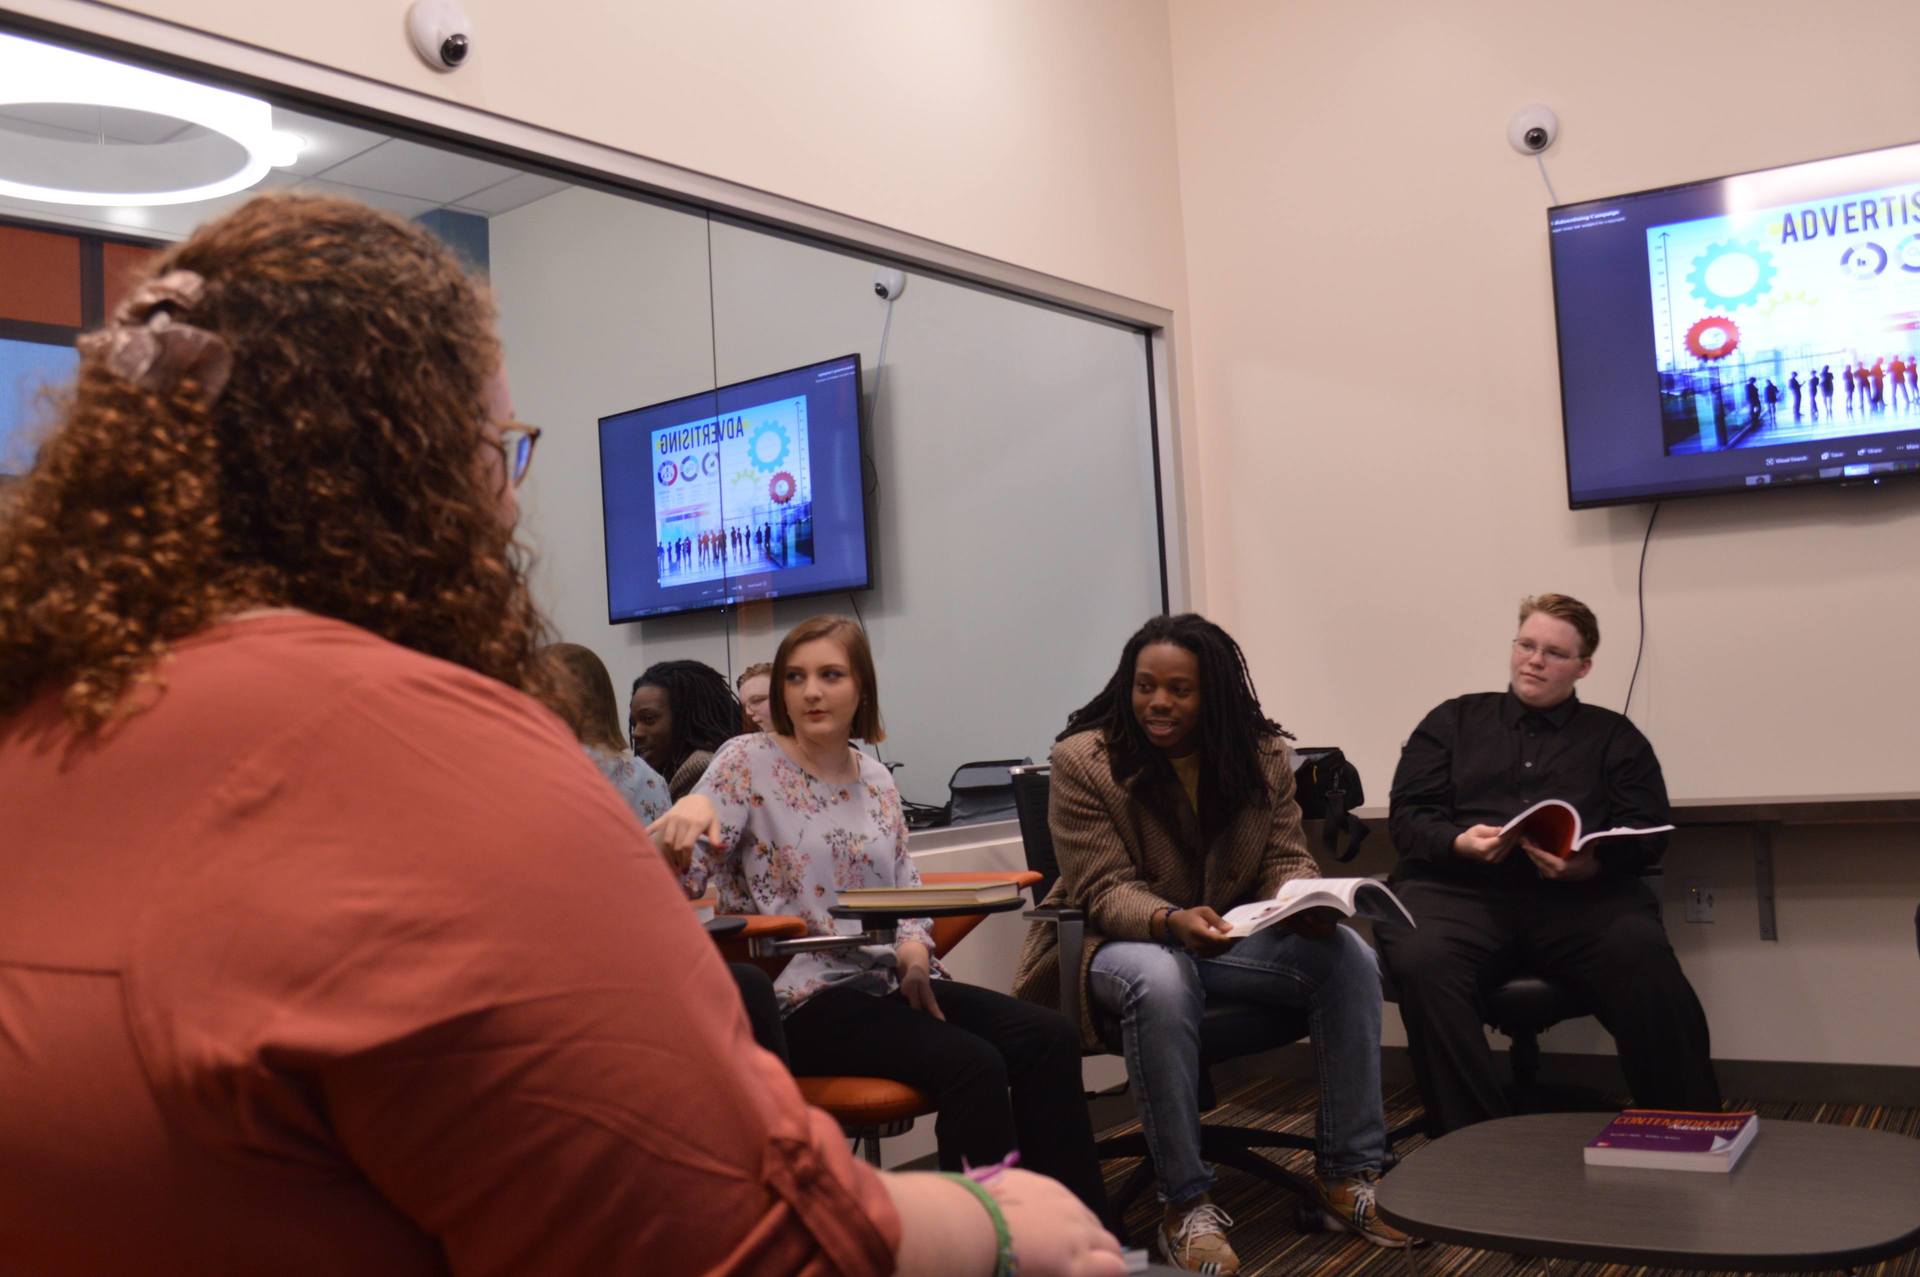 BGSU Advertising major students hold a class in an Ohio classroom with a two-way mirror for conducting focus groups for audience research.